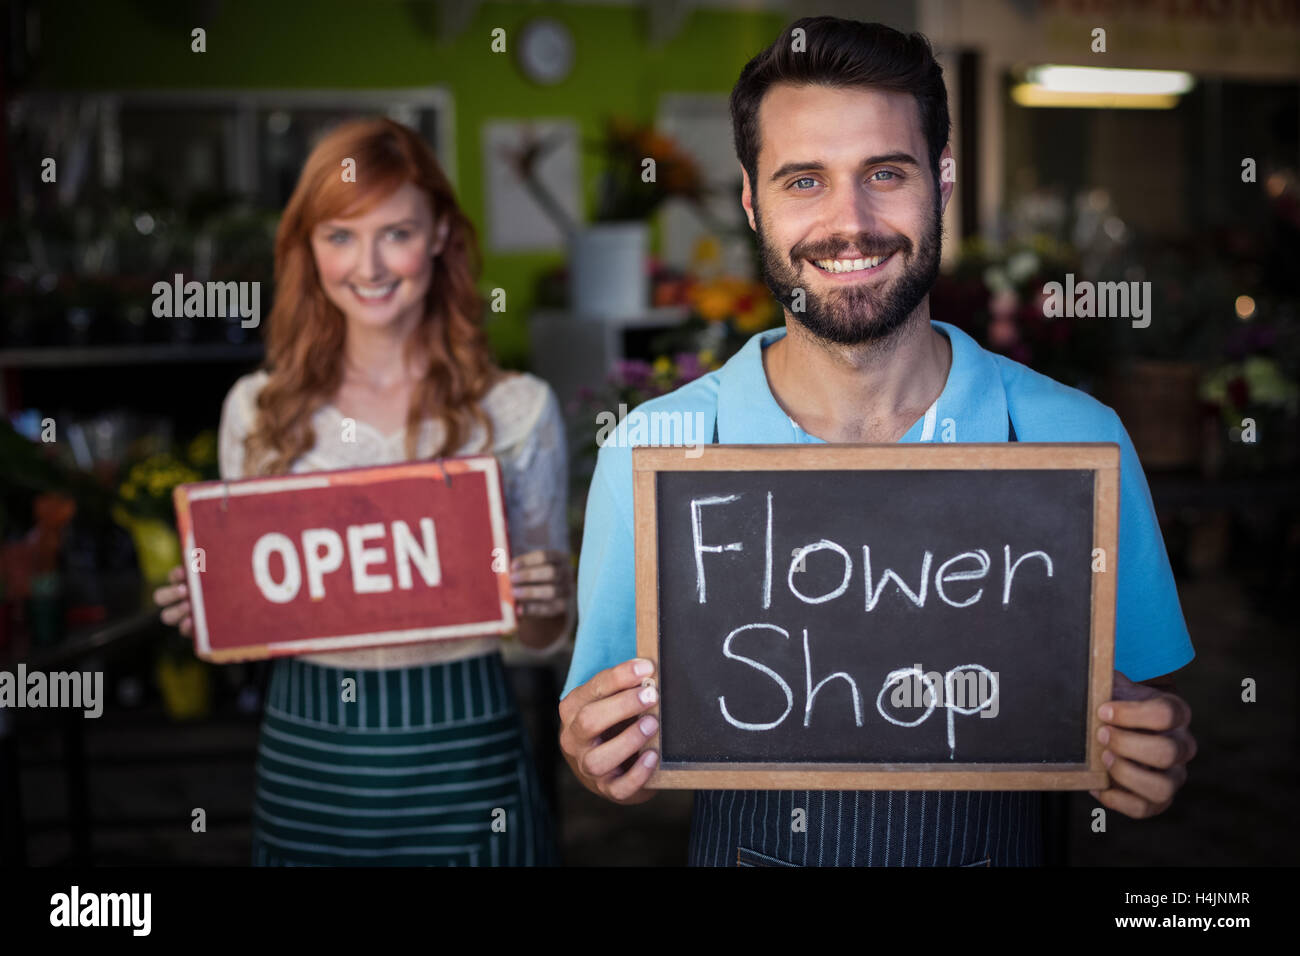 Man holding slate with flower shop sign and woman holding open signboard Stock Photo